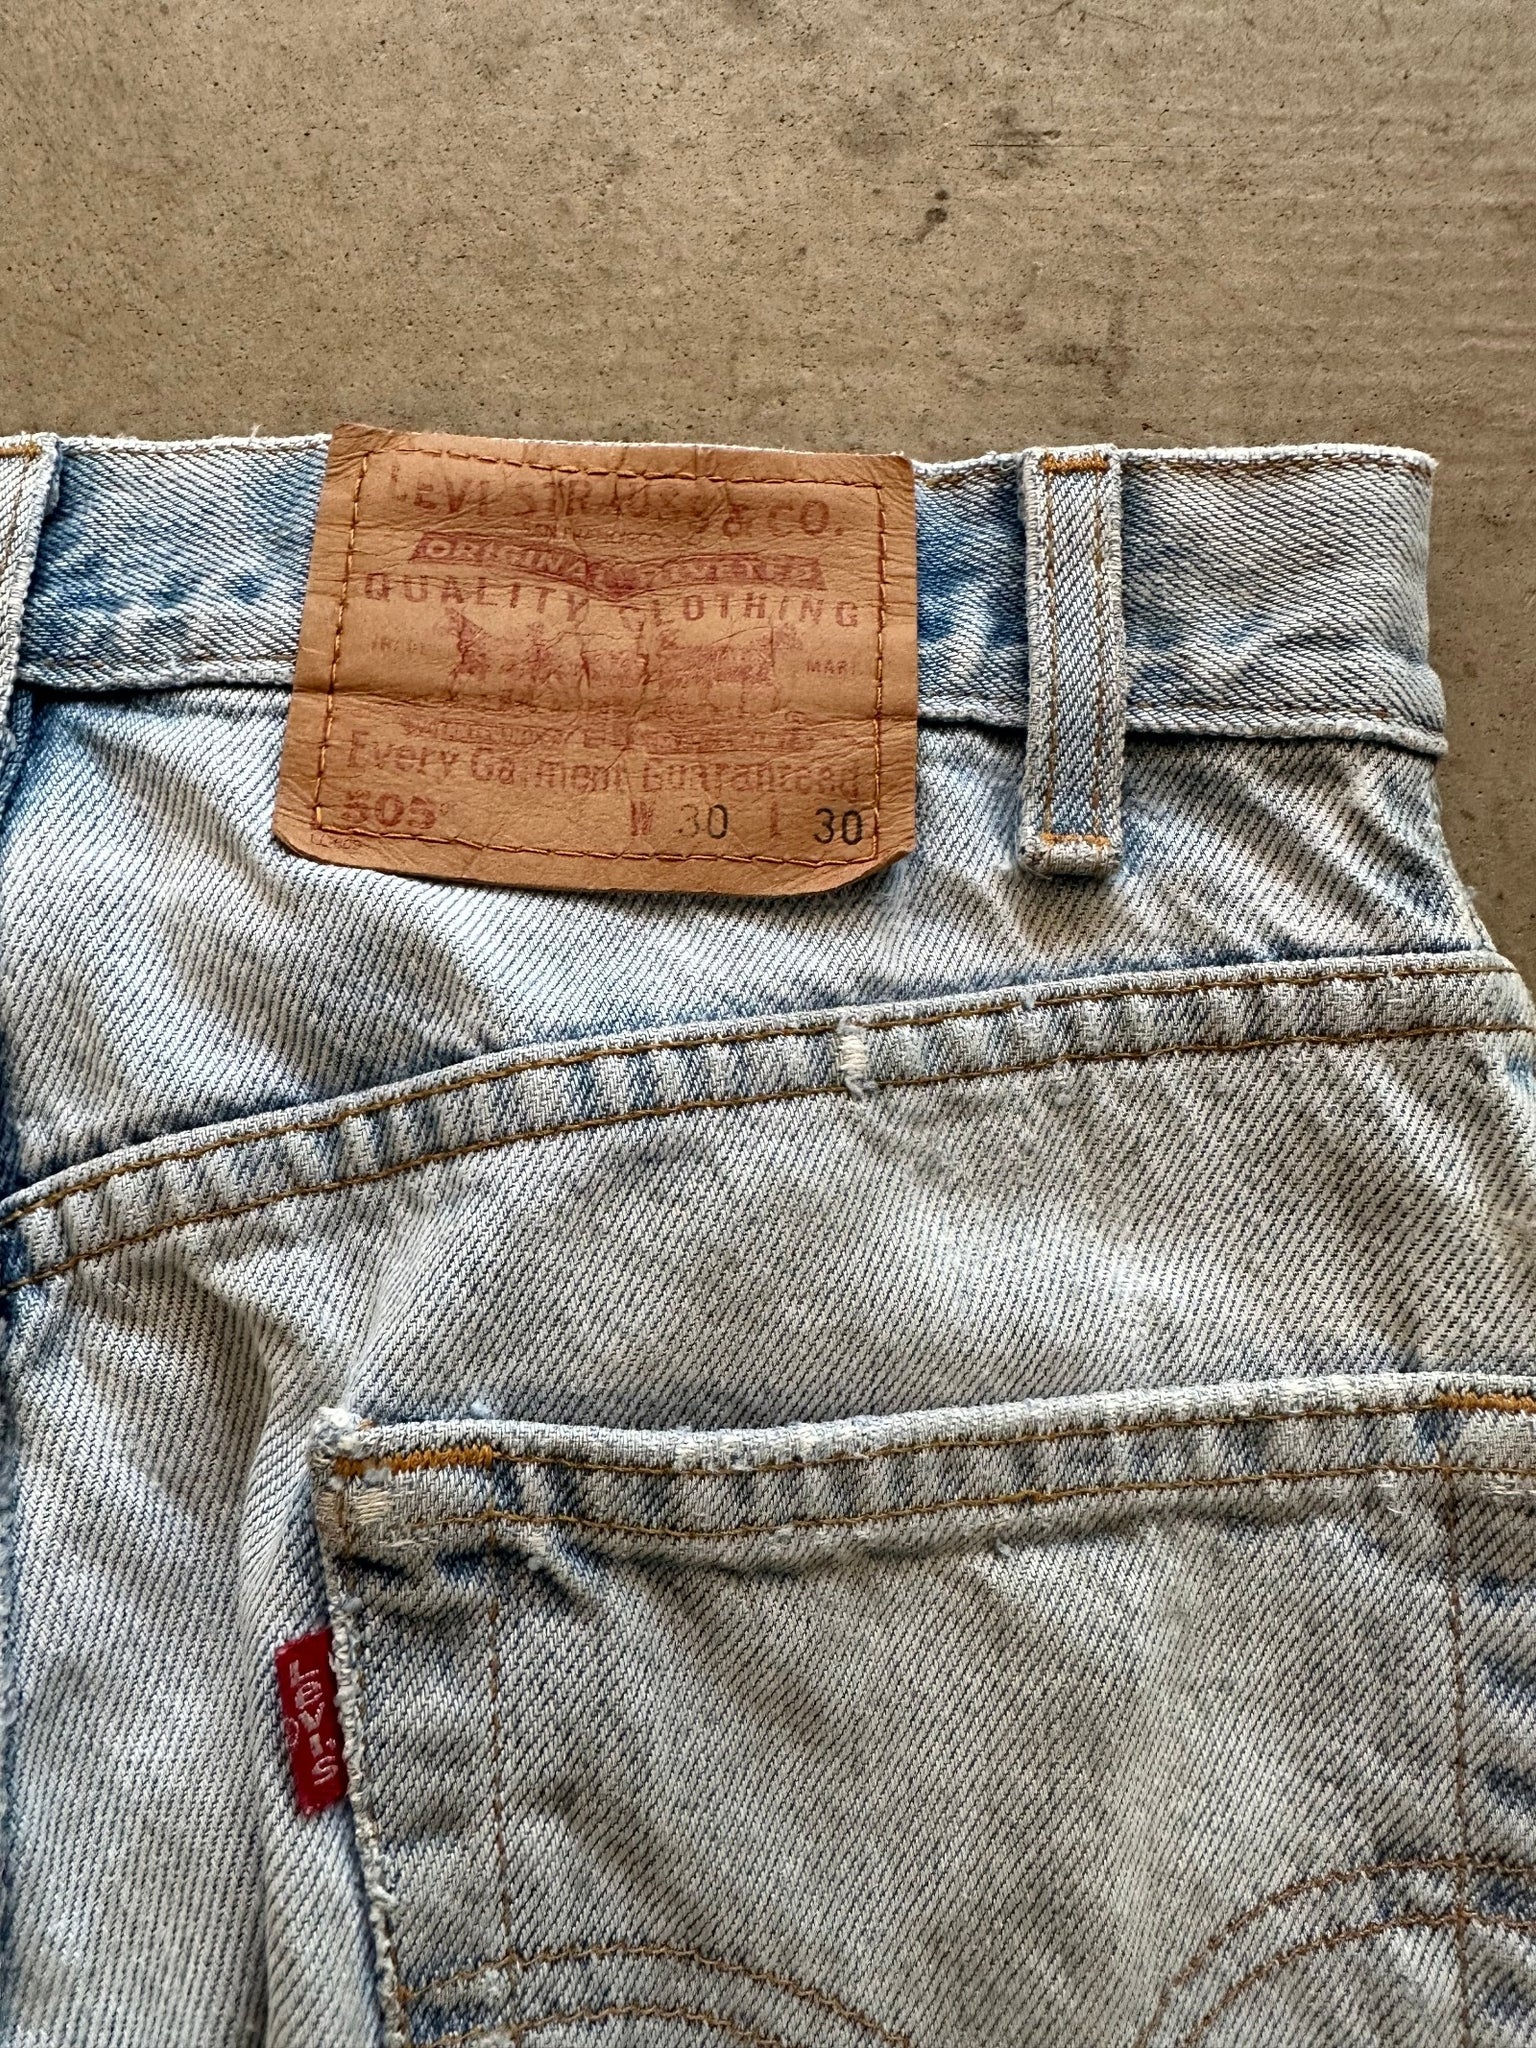 2001 Levis 505 Repaired Jeans - 30 x 30